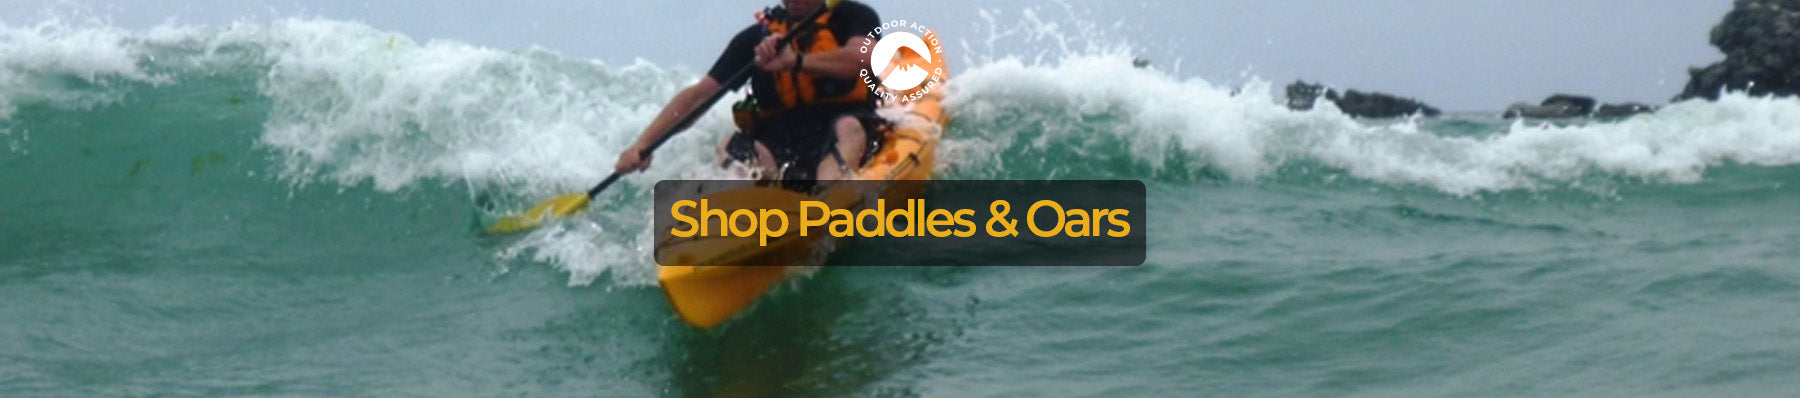 Shop Paddles & Oars online at Outdoor Action